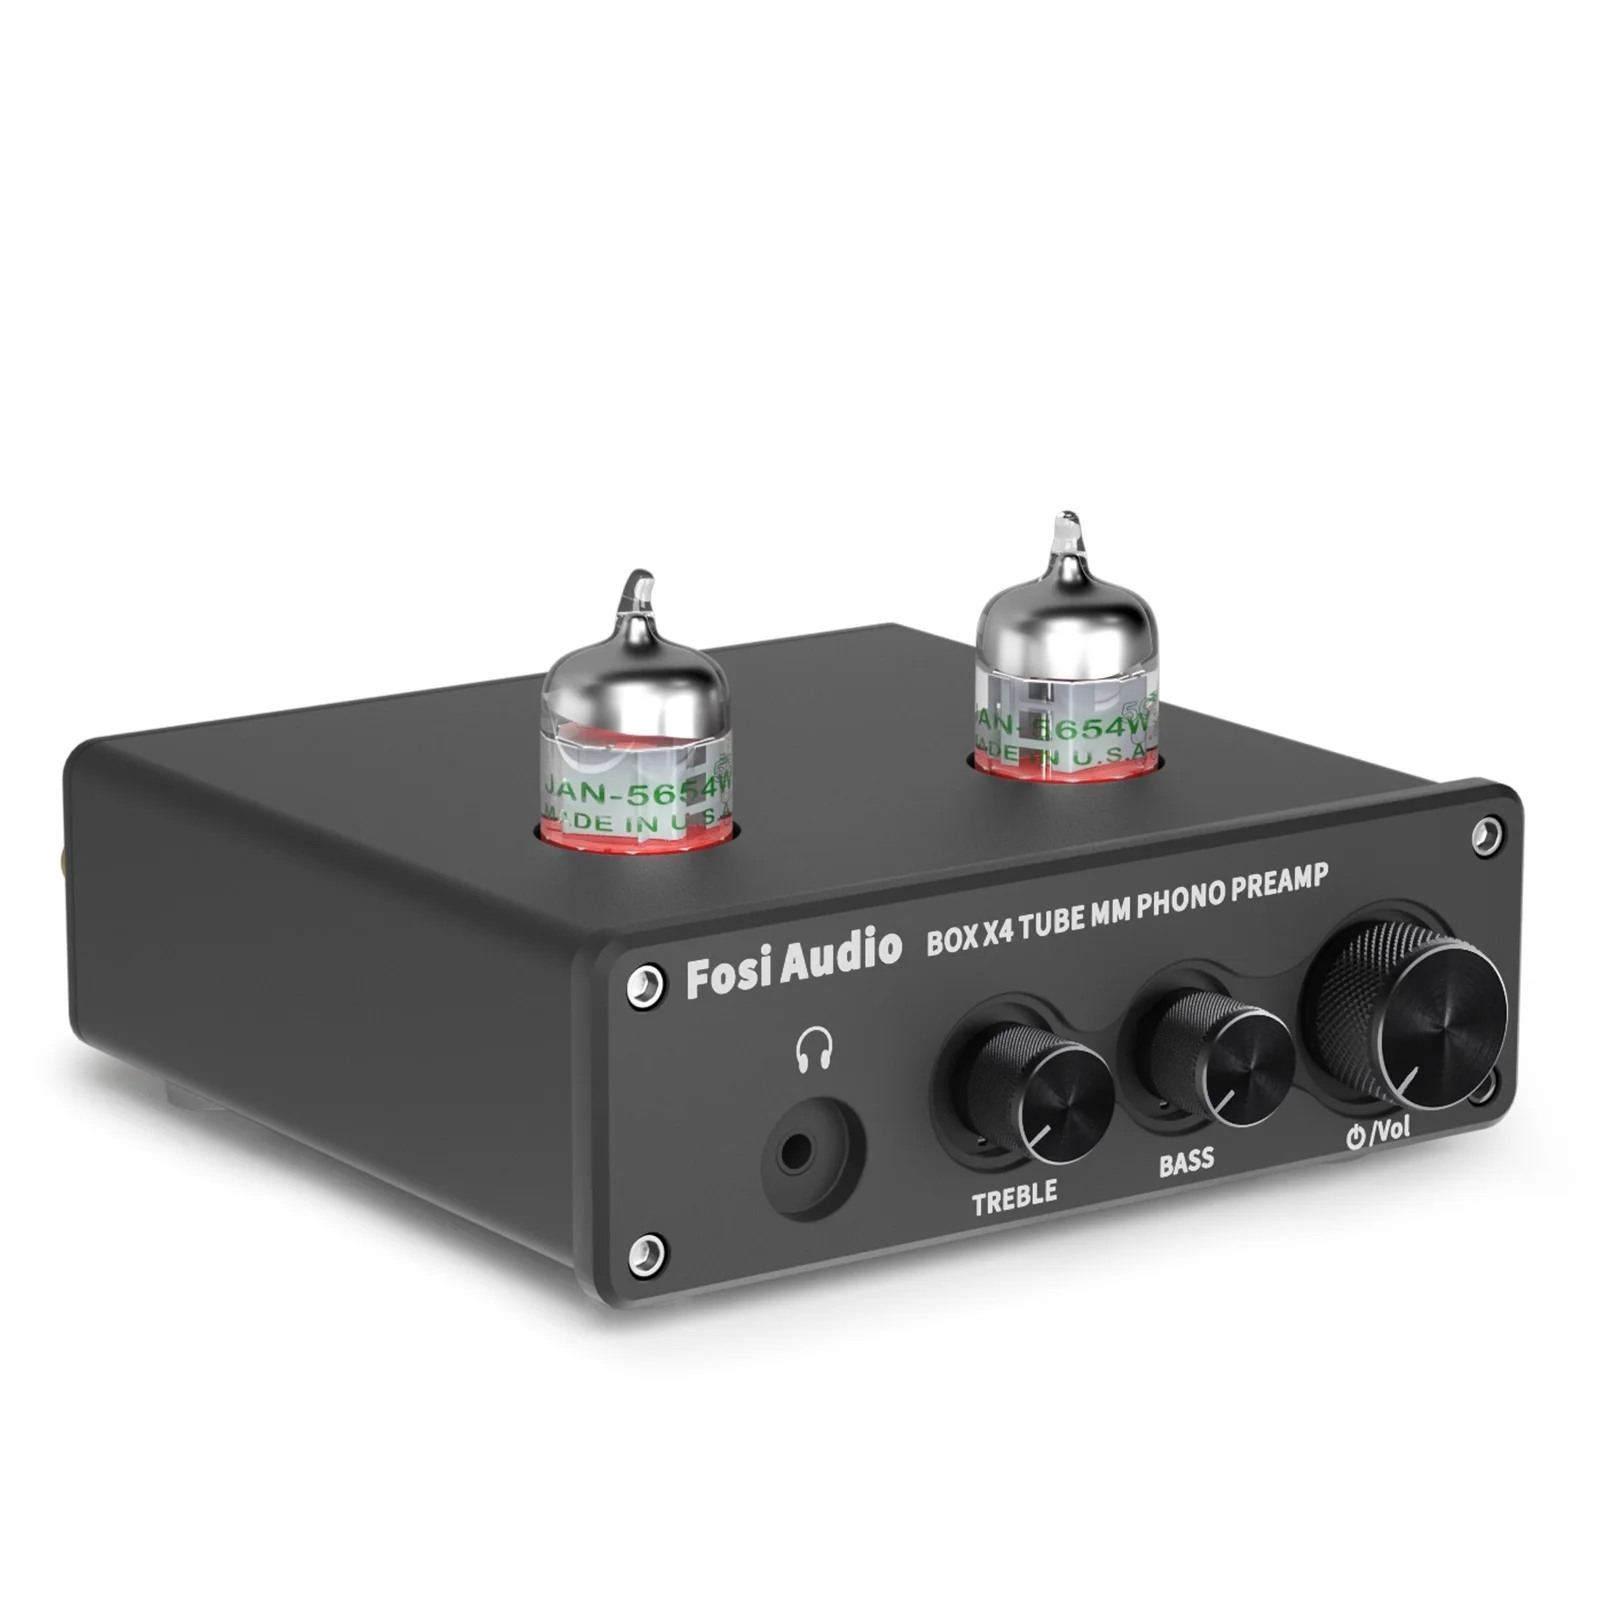 

New Audio Phono Preamp for Turntable Phonograph Preamplifier With 5654W Vacuum Tube Amplifier HiFi BOX X4